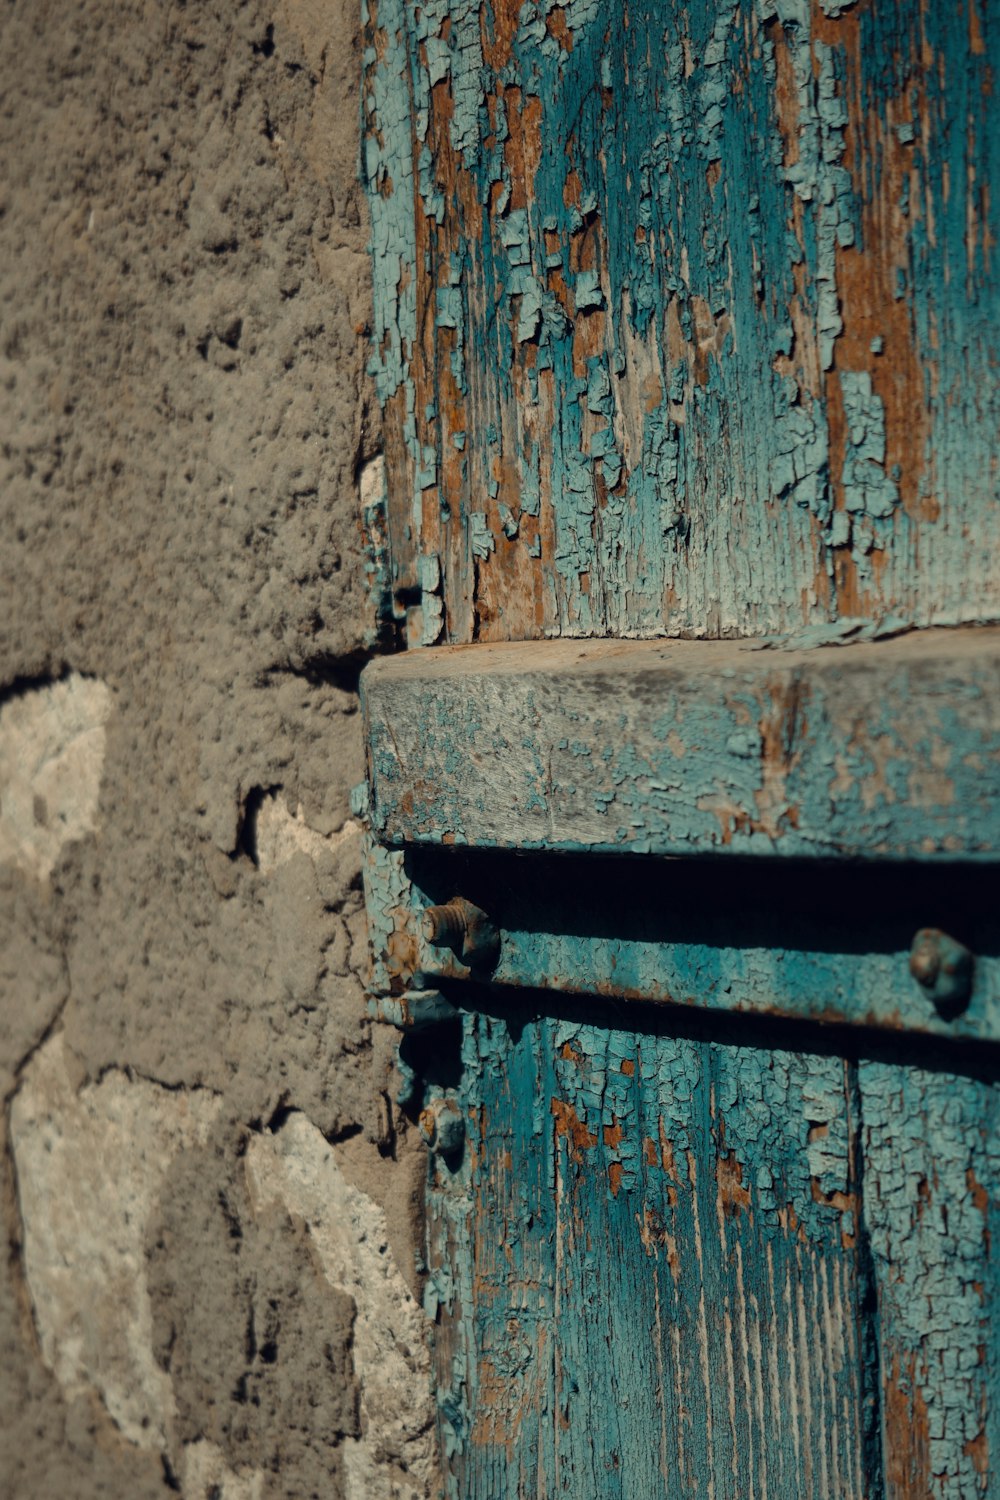 a close up of a wooden door with peeling paint